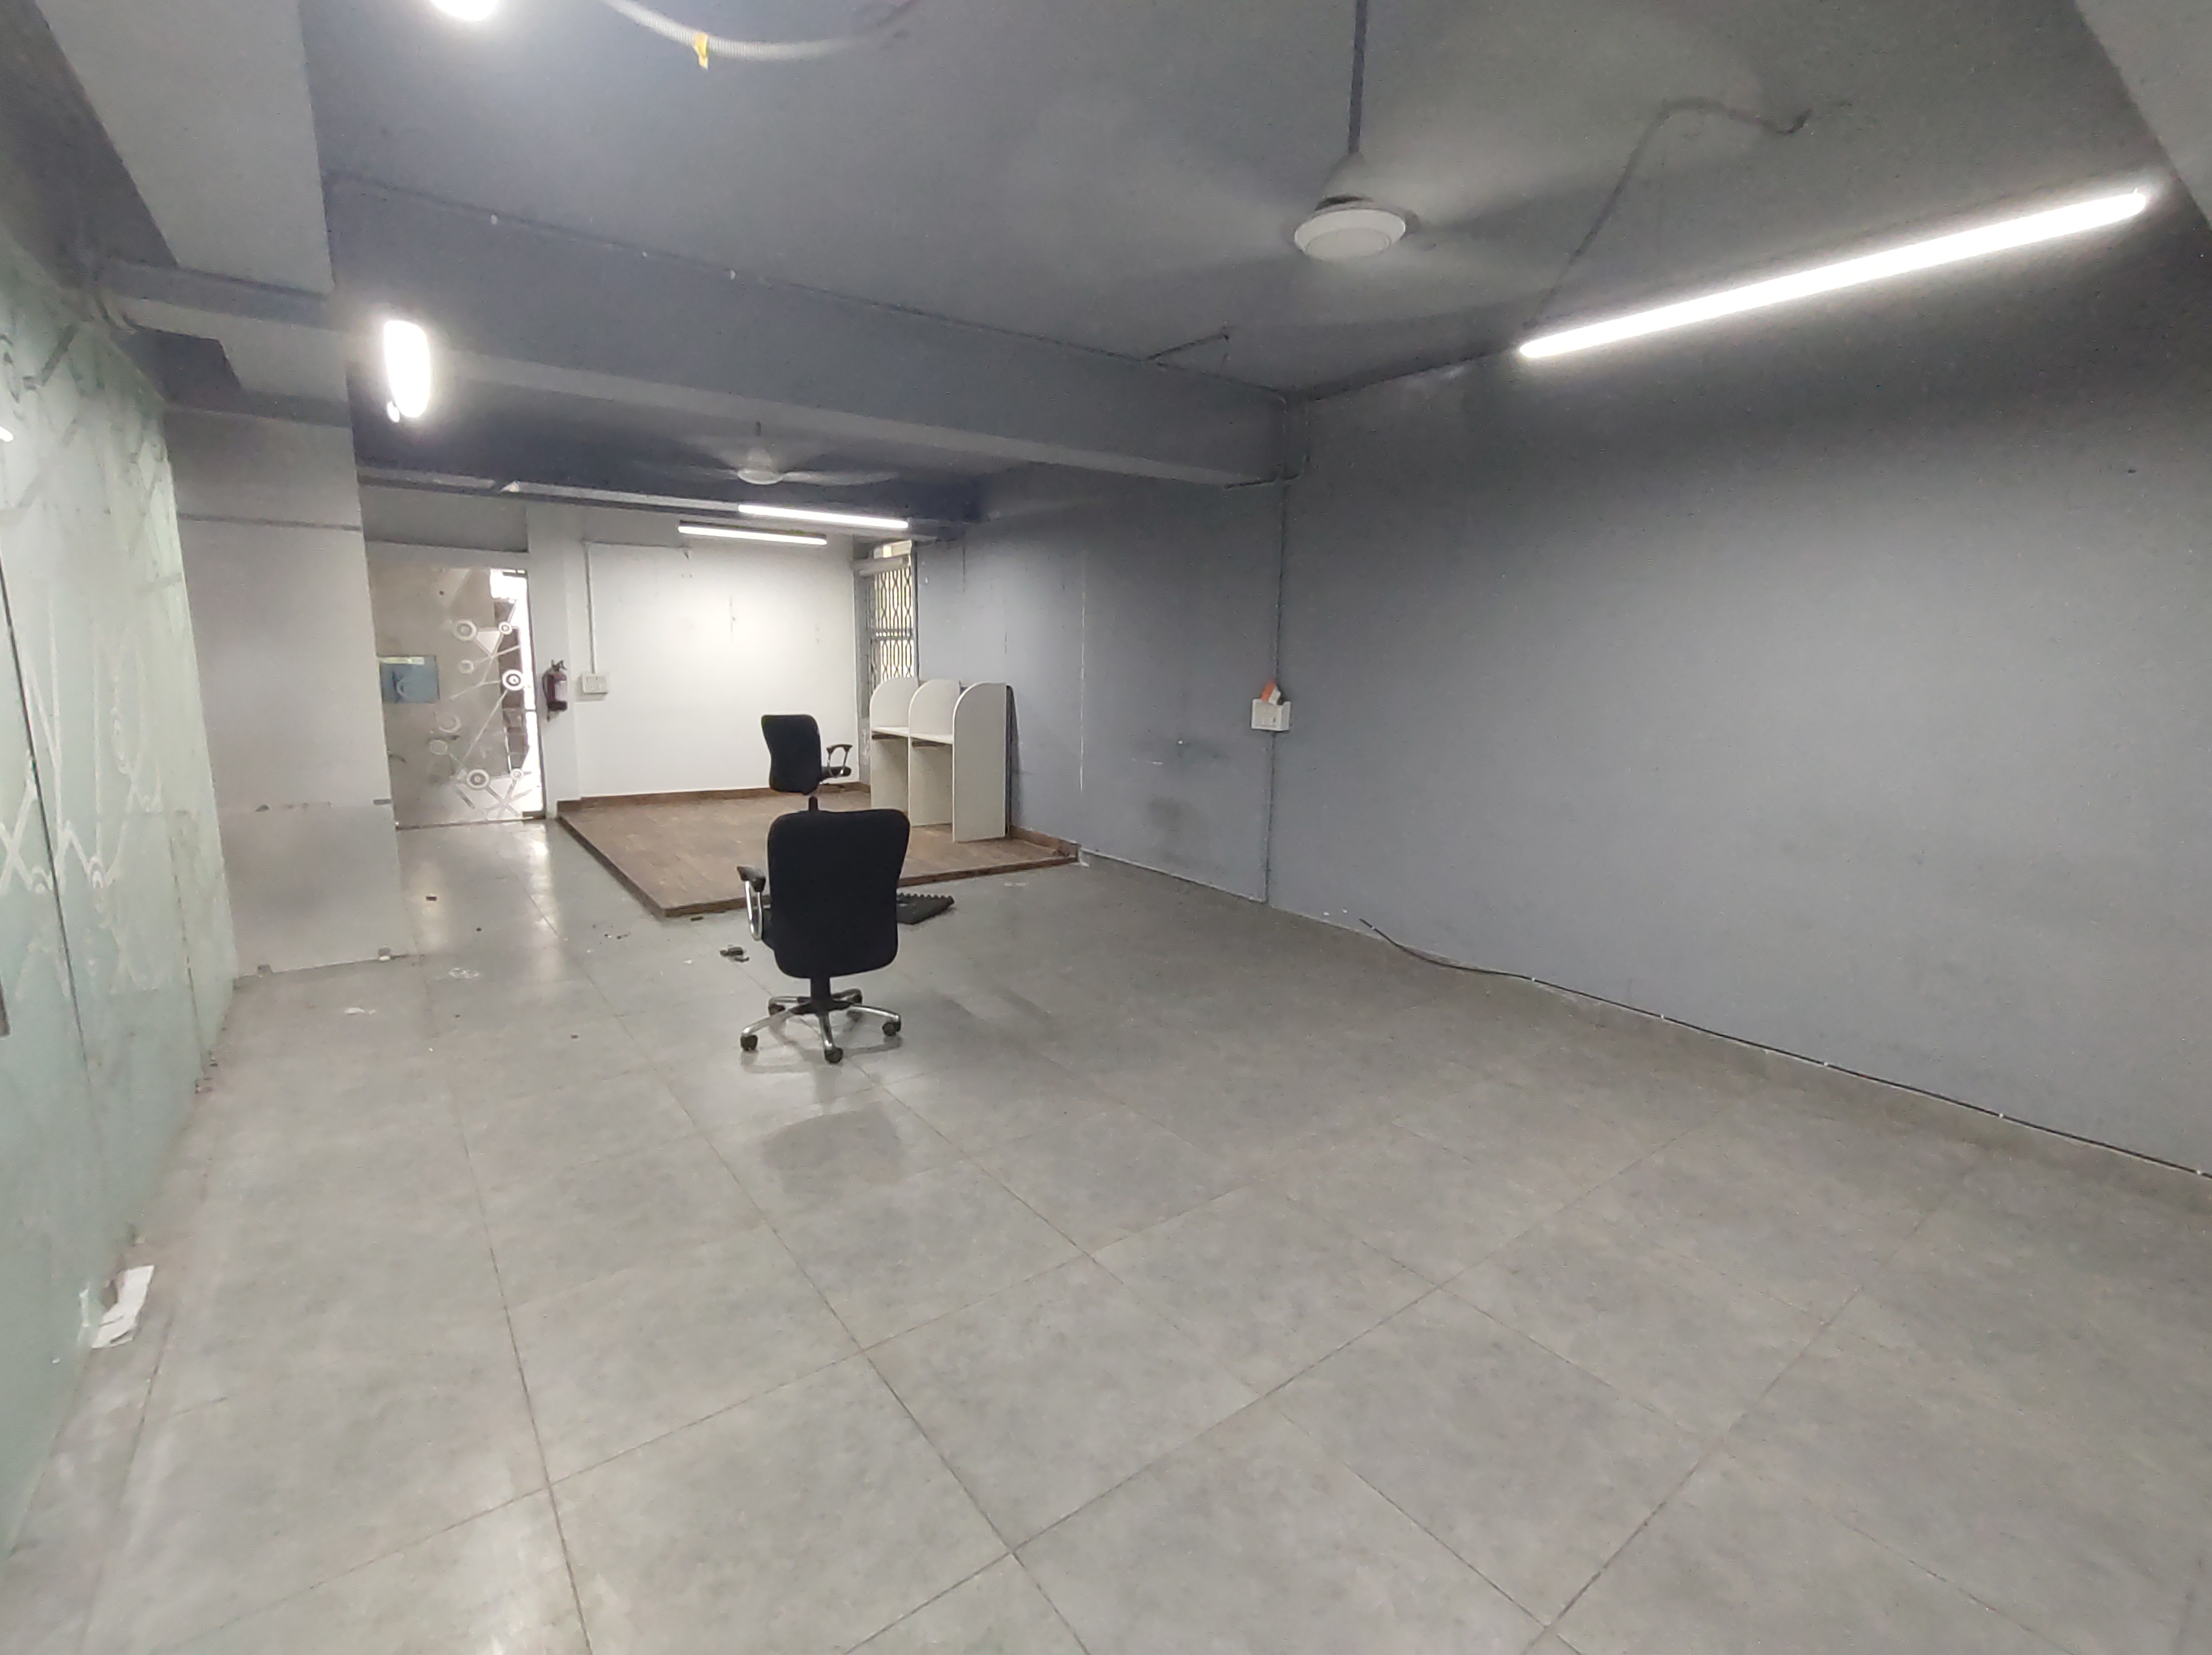 SEMI FURNISHED OFFICE SPACE AVAILABLE ON GROUND FLOOR